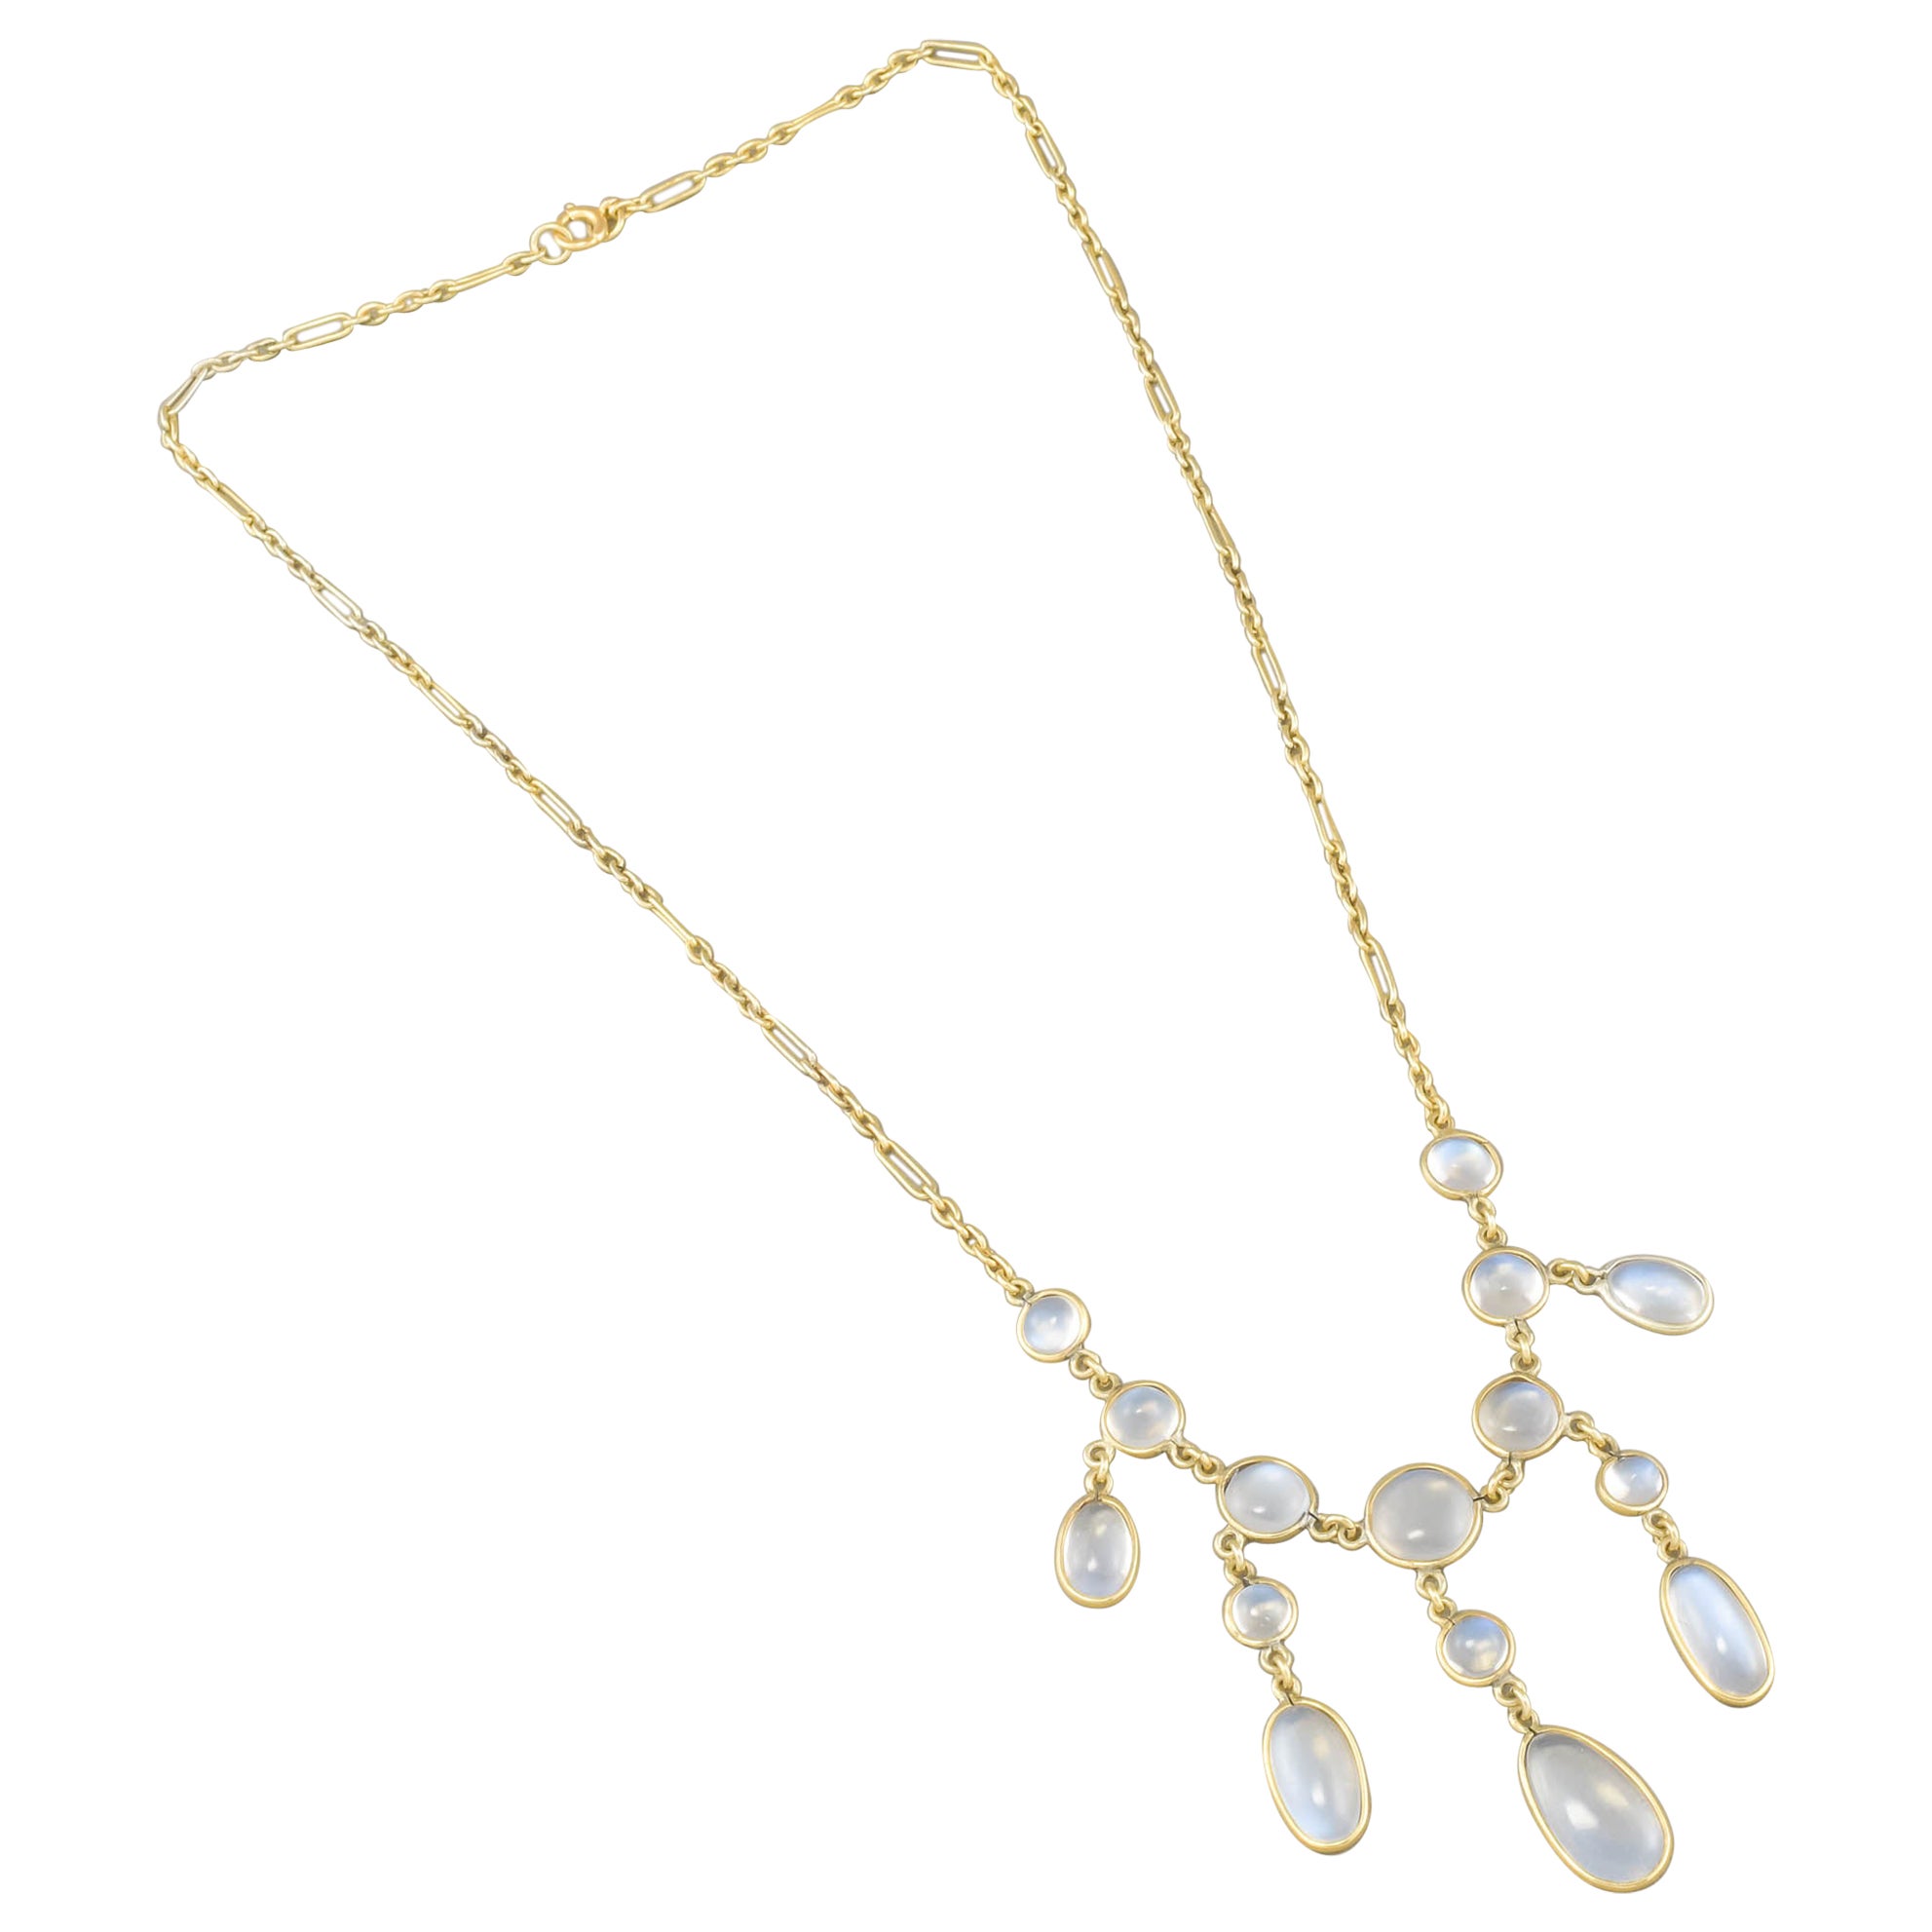 Antique 15K Gold Moonstone Drop Necklace with Fancy Link Chain